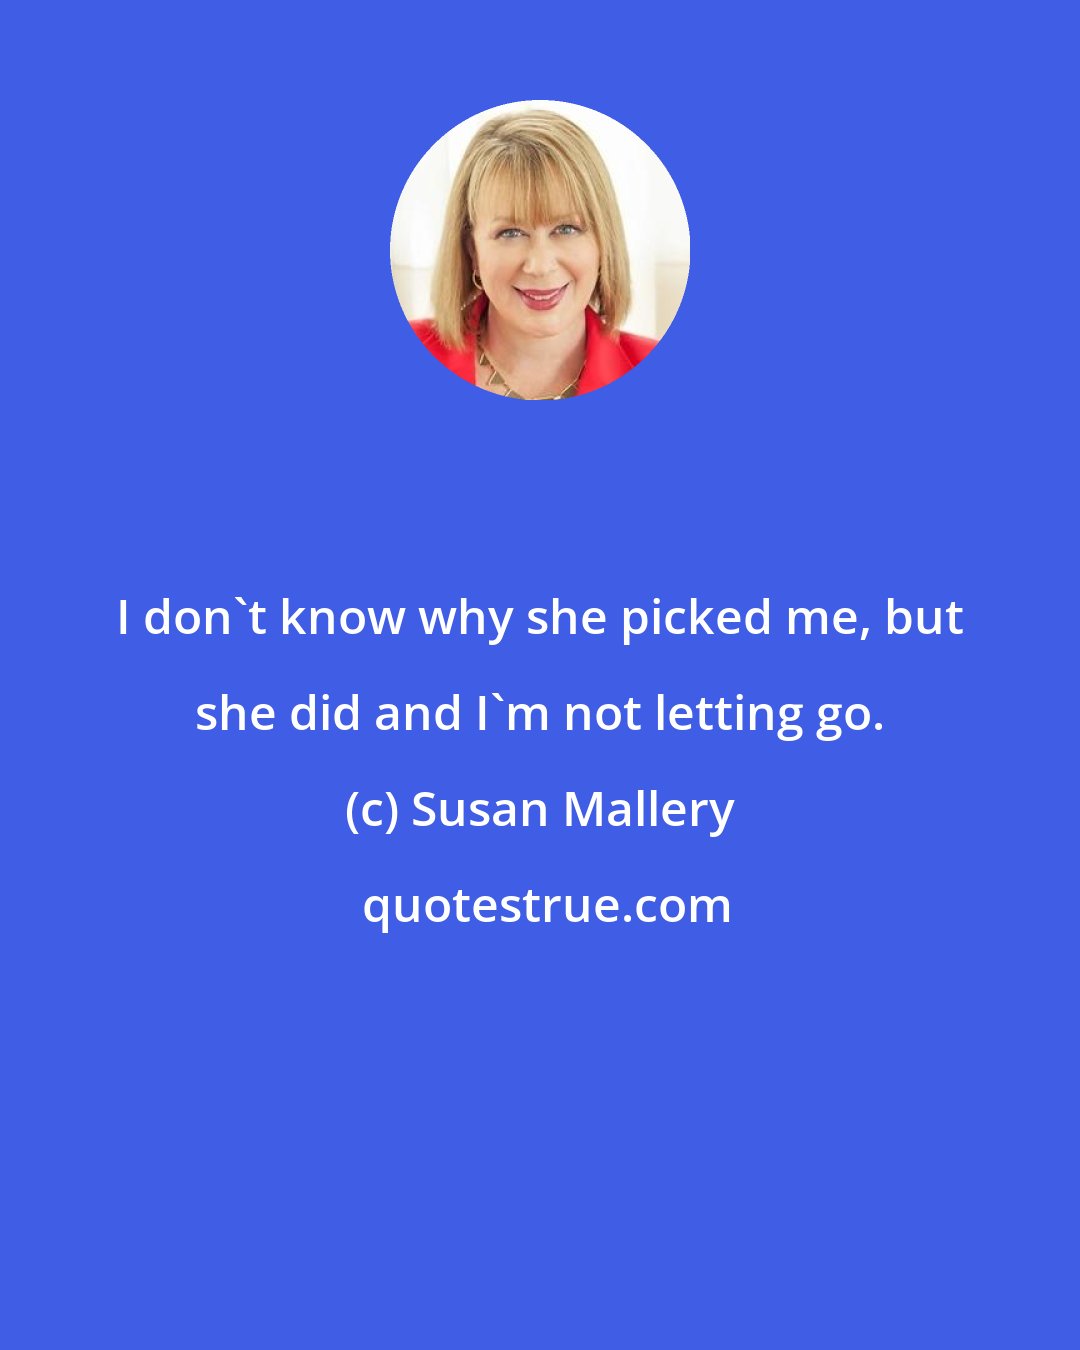 Susan Mallery: I don't know why she picked me, but she did and I'm not letting go.